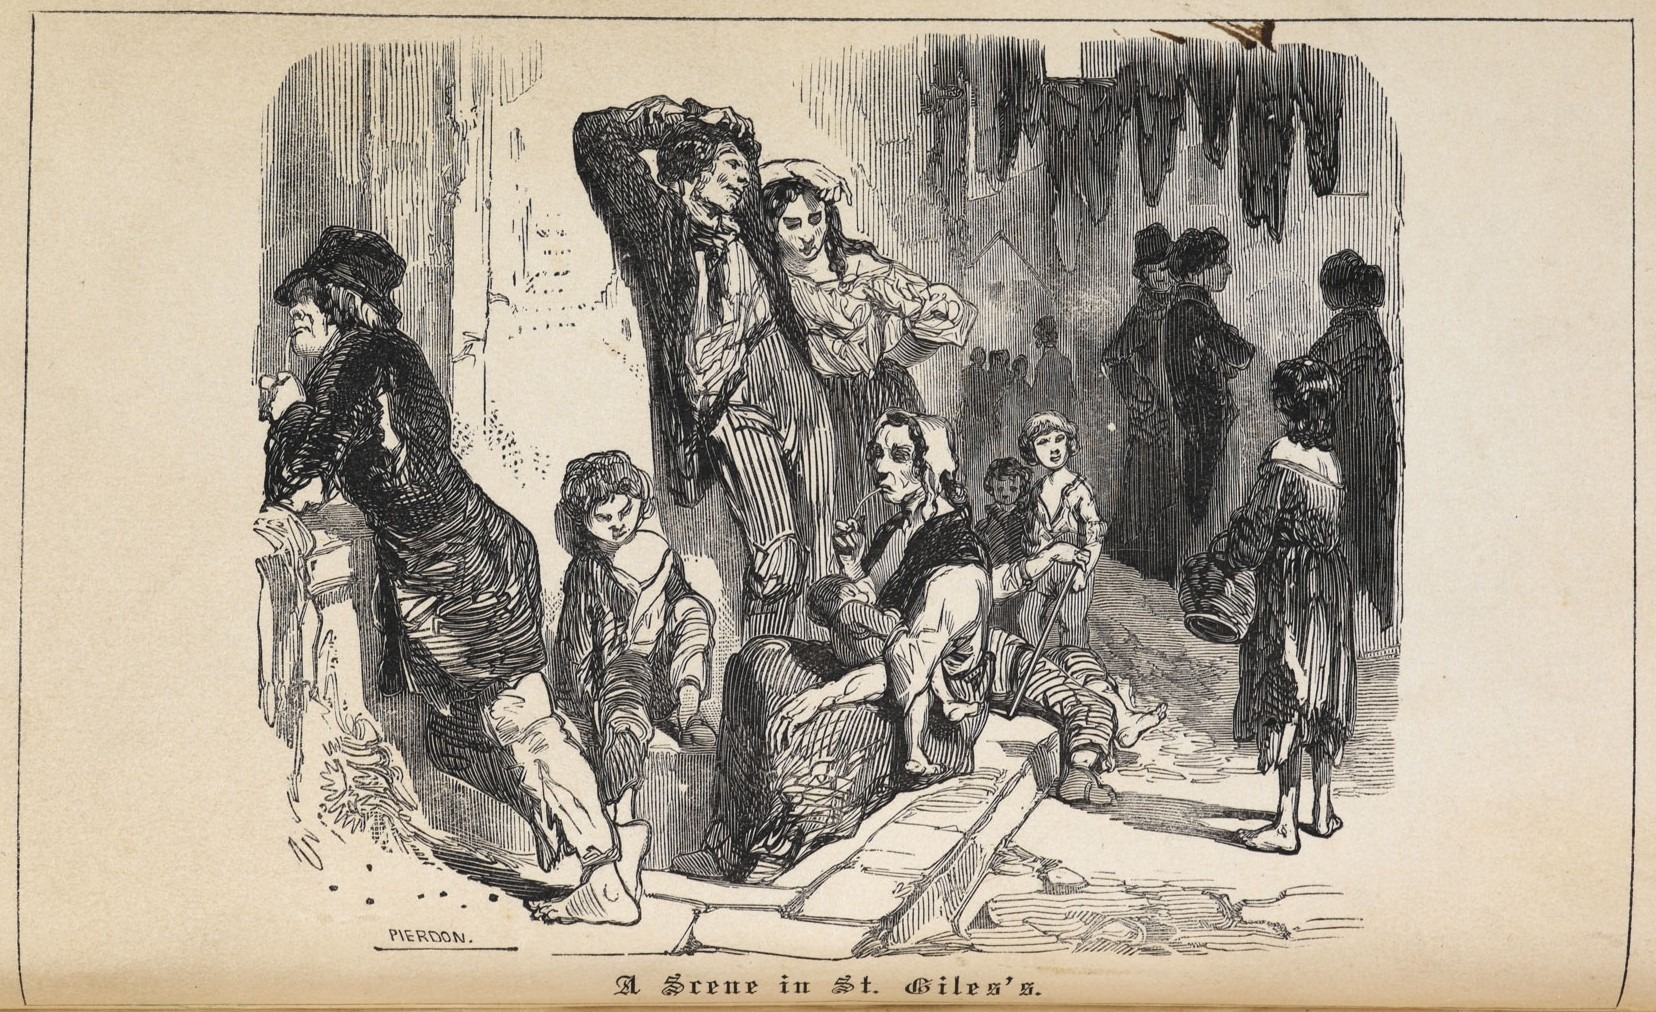 an illustration depicting the residents of St. Giles